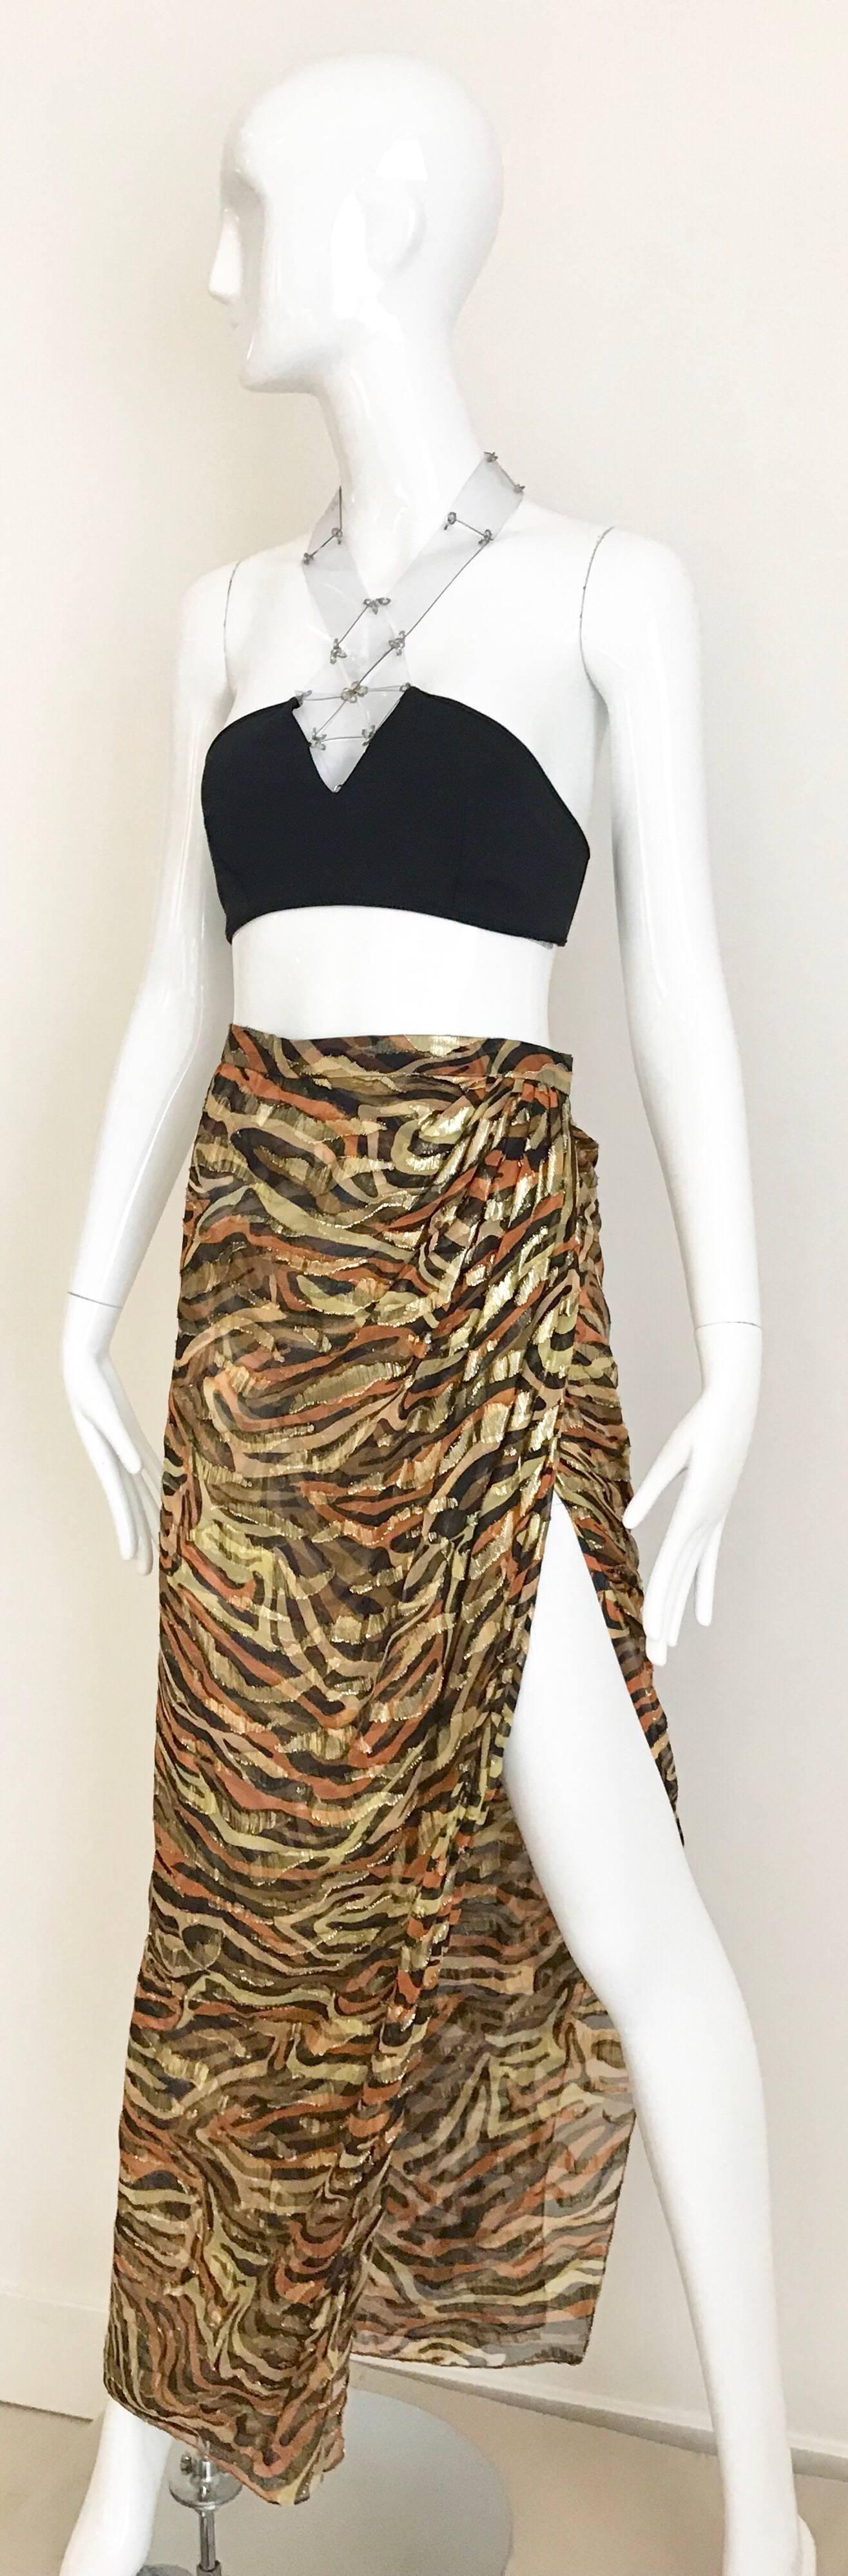 Sexy and fun 90s Bill Blass metallic silk lame zebra print in gold, black and orange.
Skirt is a wrap style. Skirt is styled with vintage Paco Rabanne 2 piece bathing suit available for purchase. 
Skirt fit size 0/2/4/
Waist is 26inches but hook an